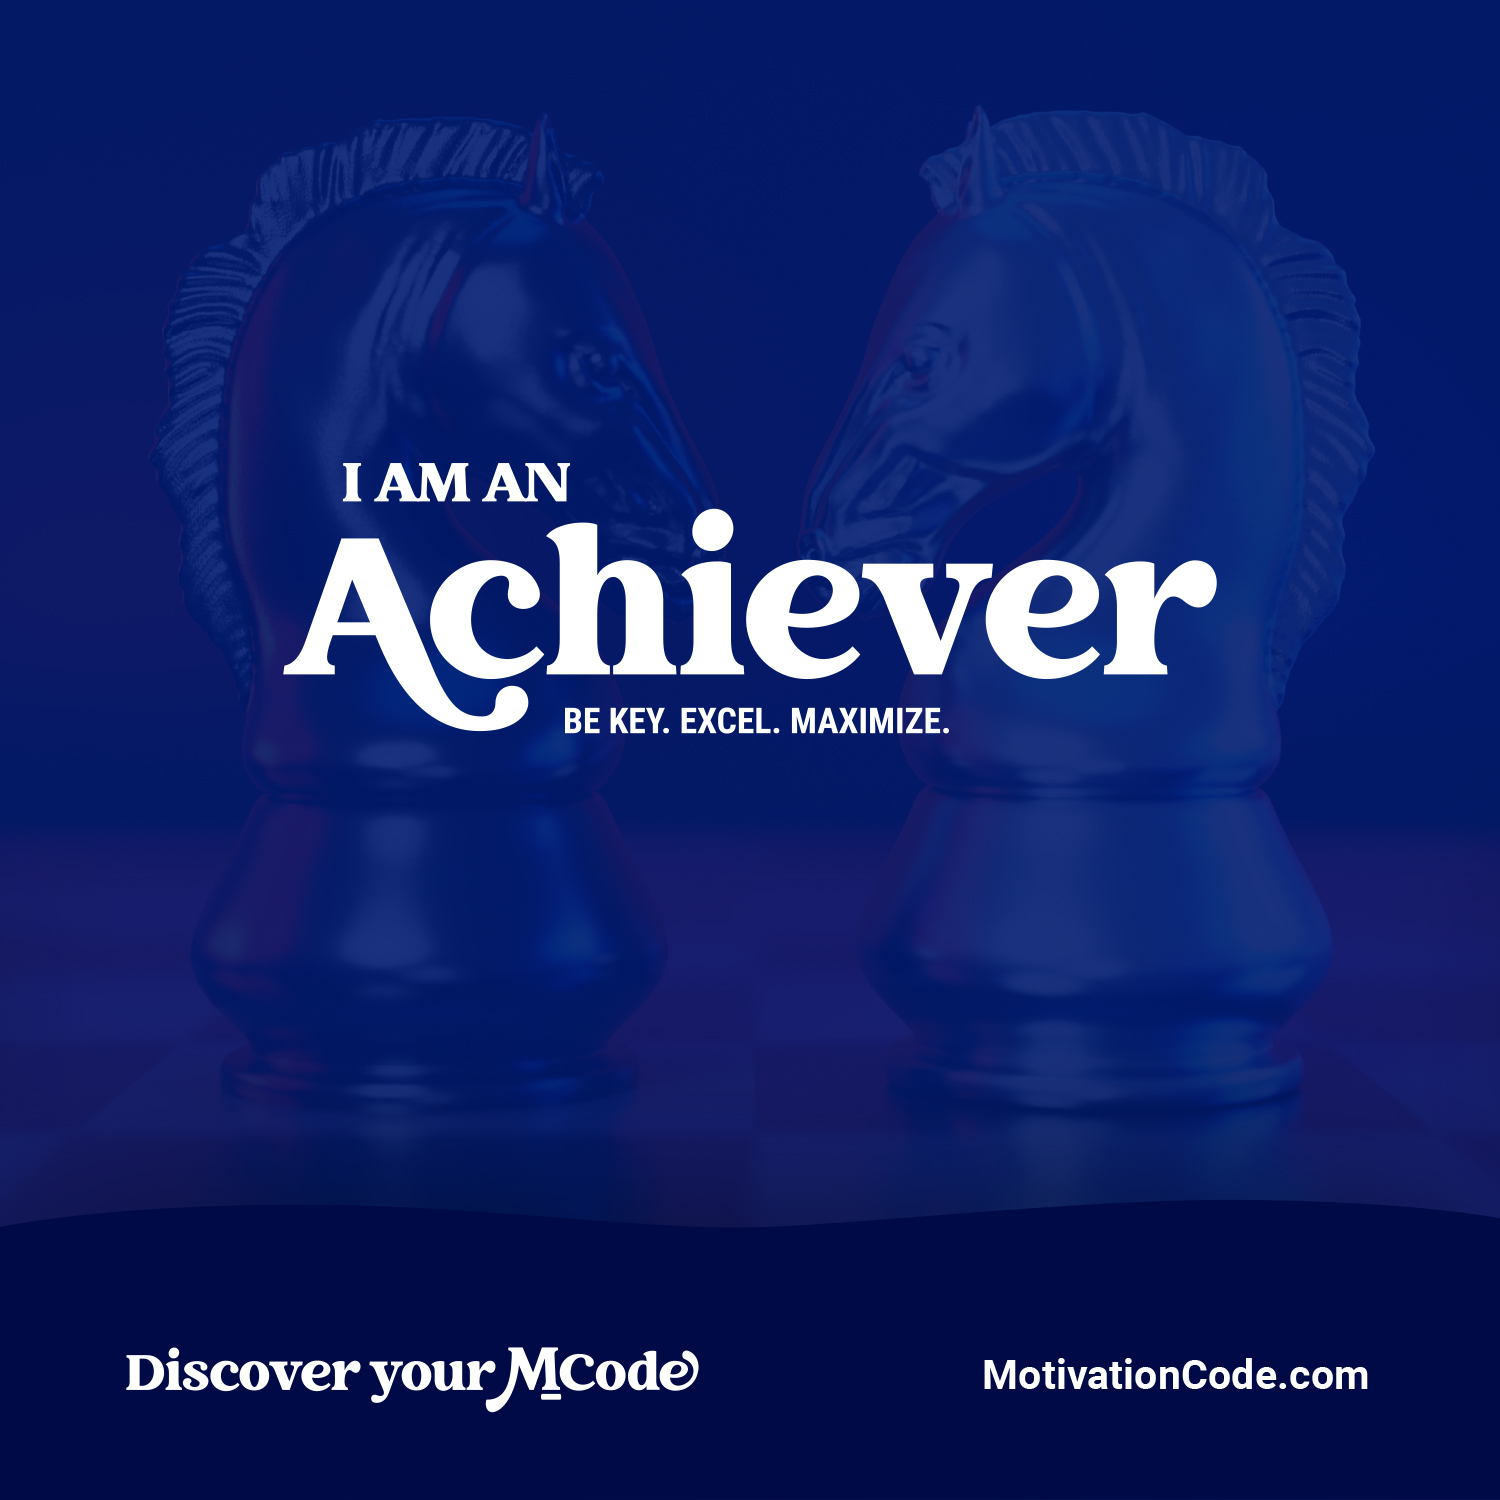 MCode Achiever image you can download and share on social media